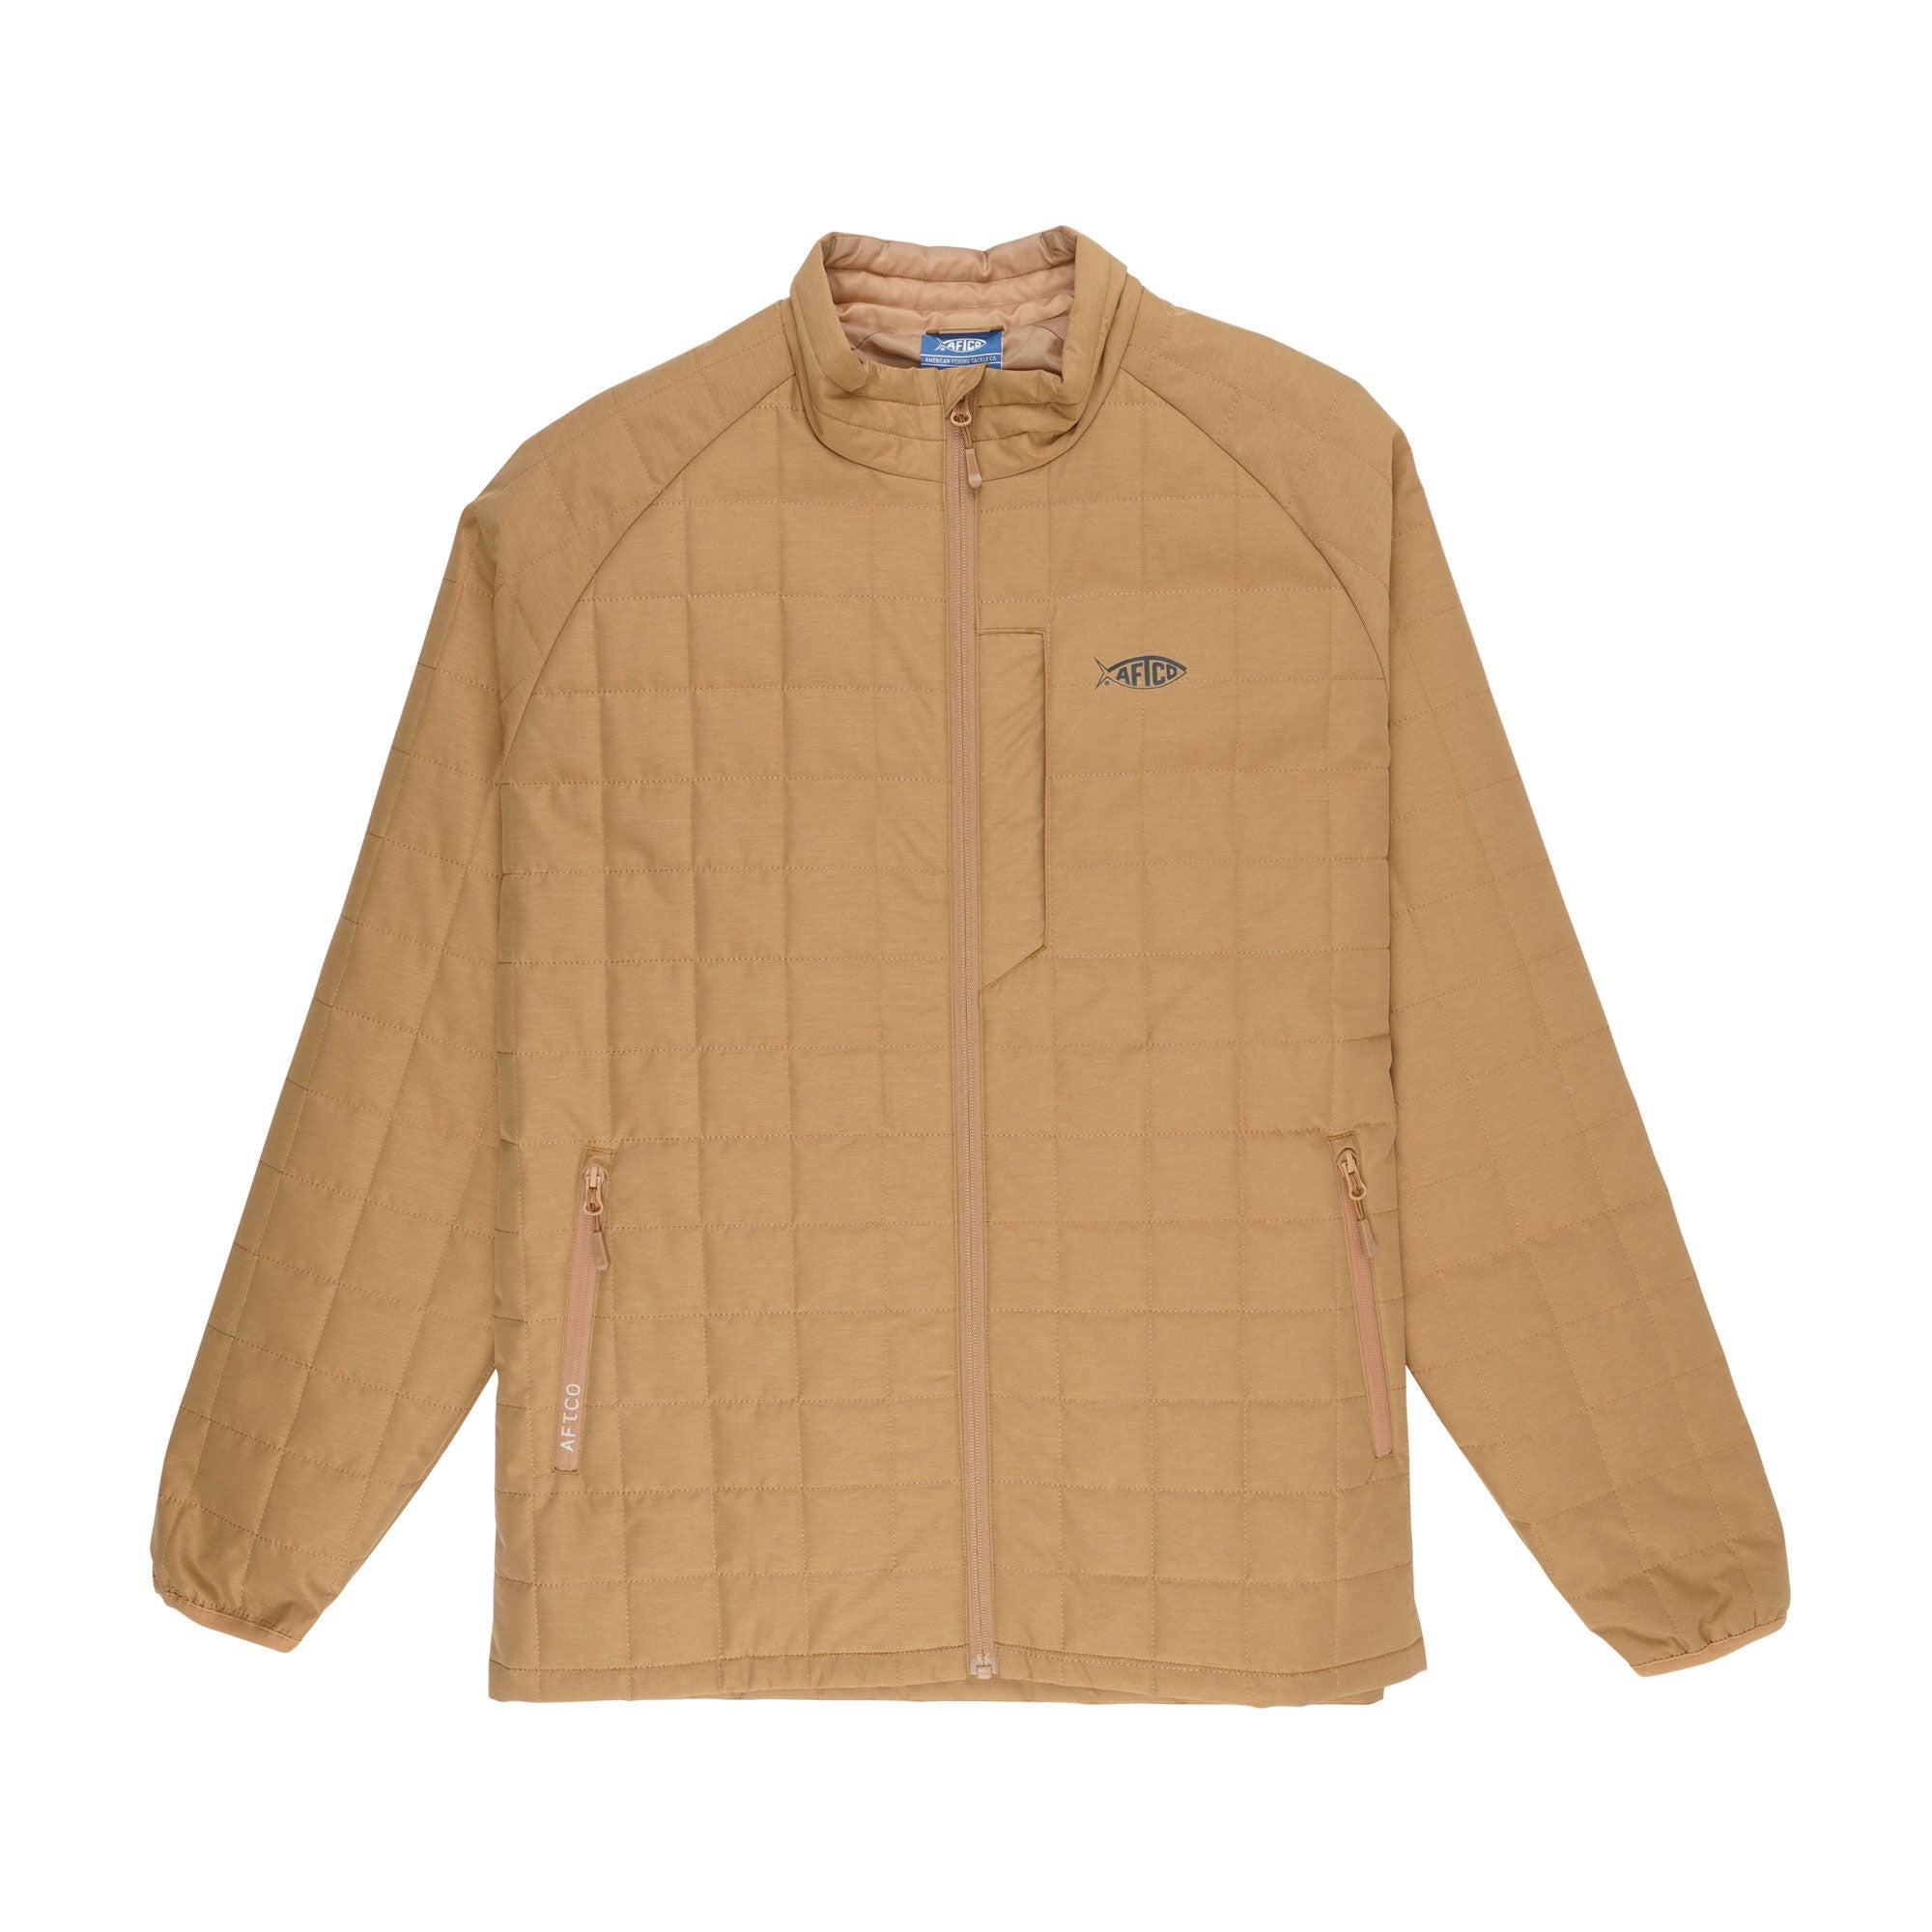 AFTCO Pufferfish 300 Jacket / Cathaway Spice Heather / L